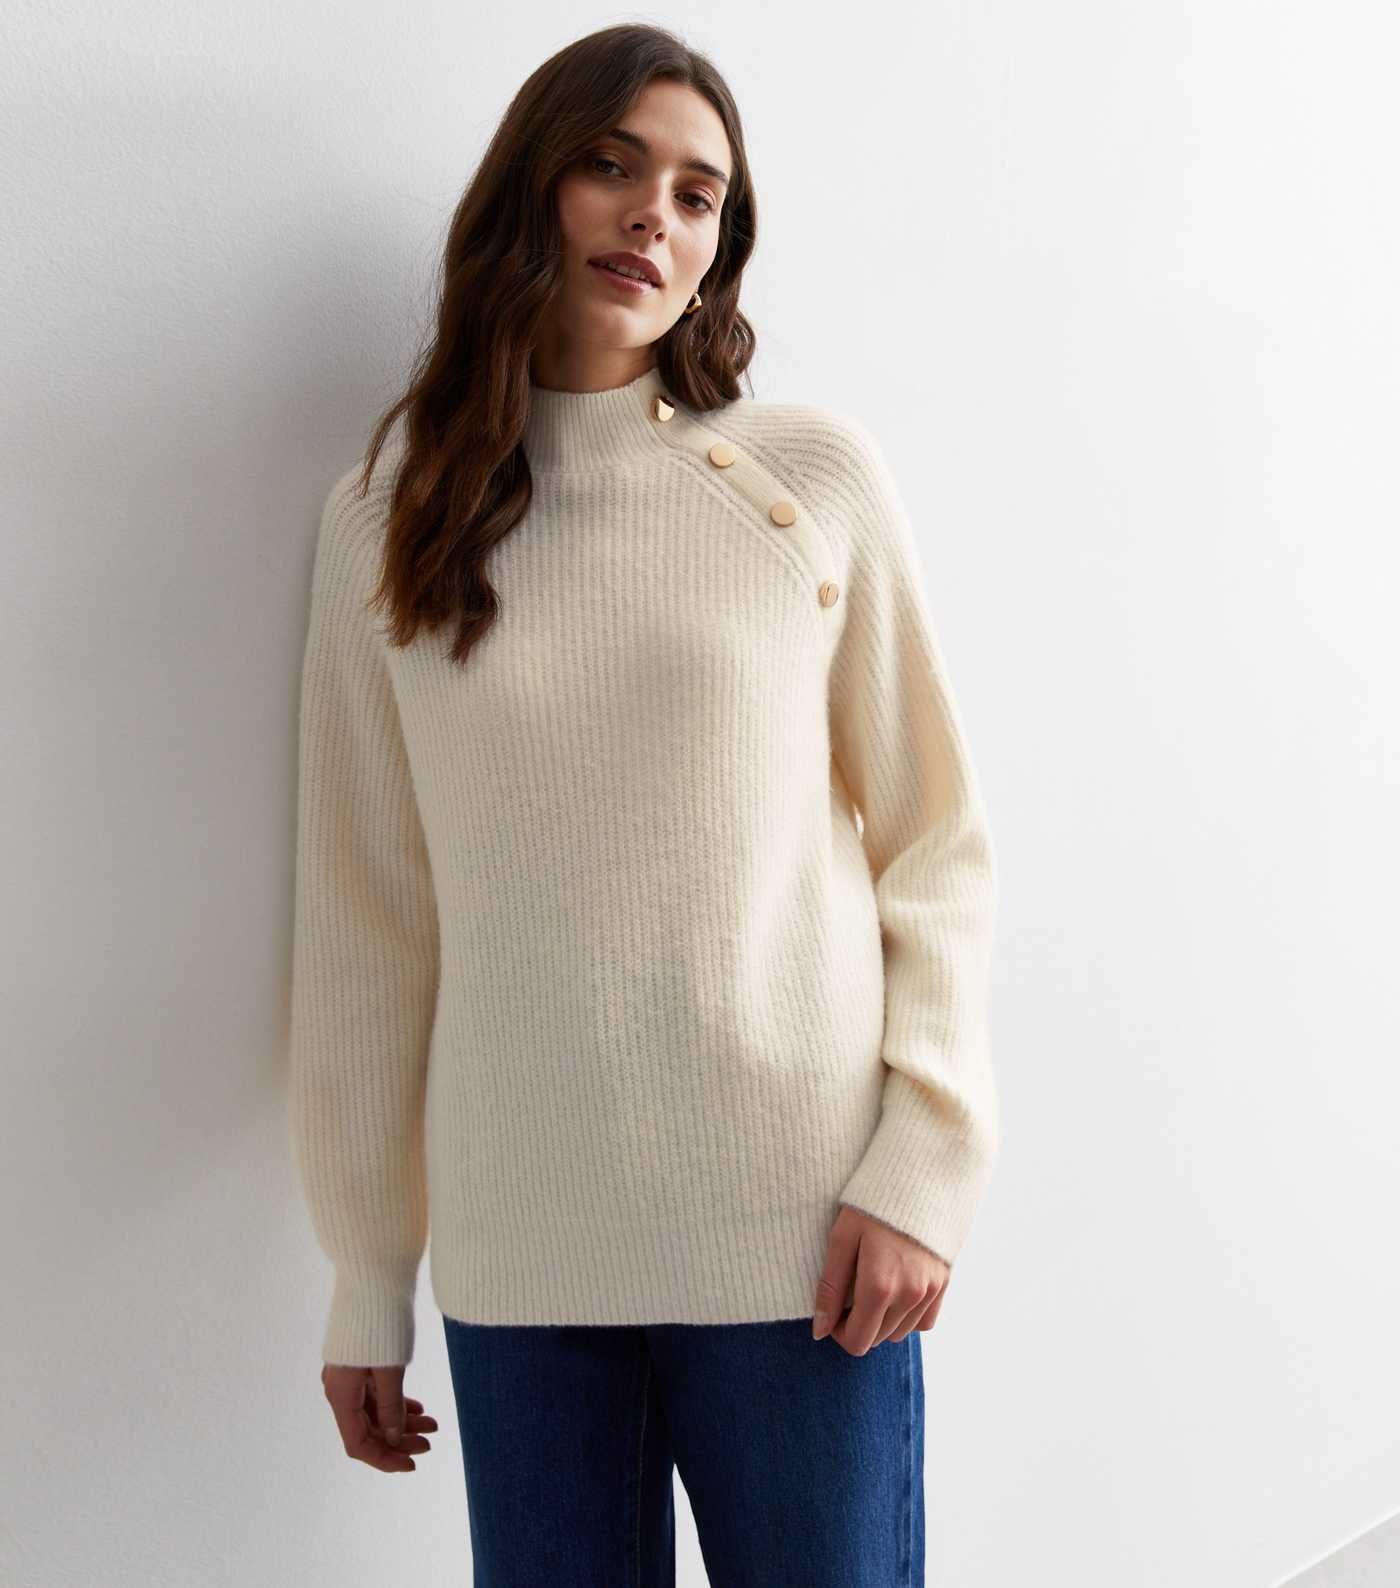 Cream Knit Button Shoulder Jumper
						
						Add to Saved Items
						Remove from Saved Items | New Look (UK)